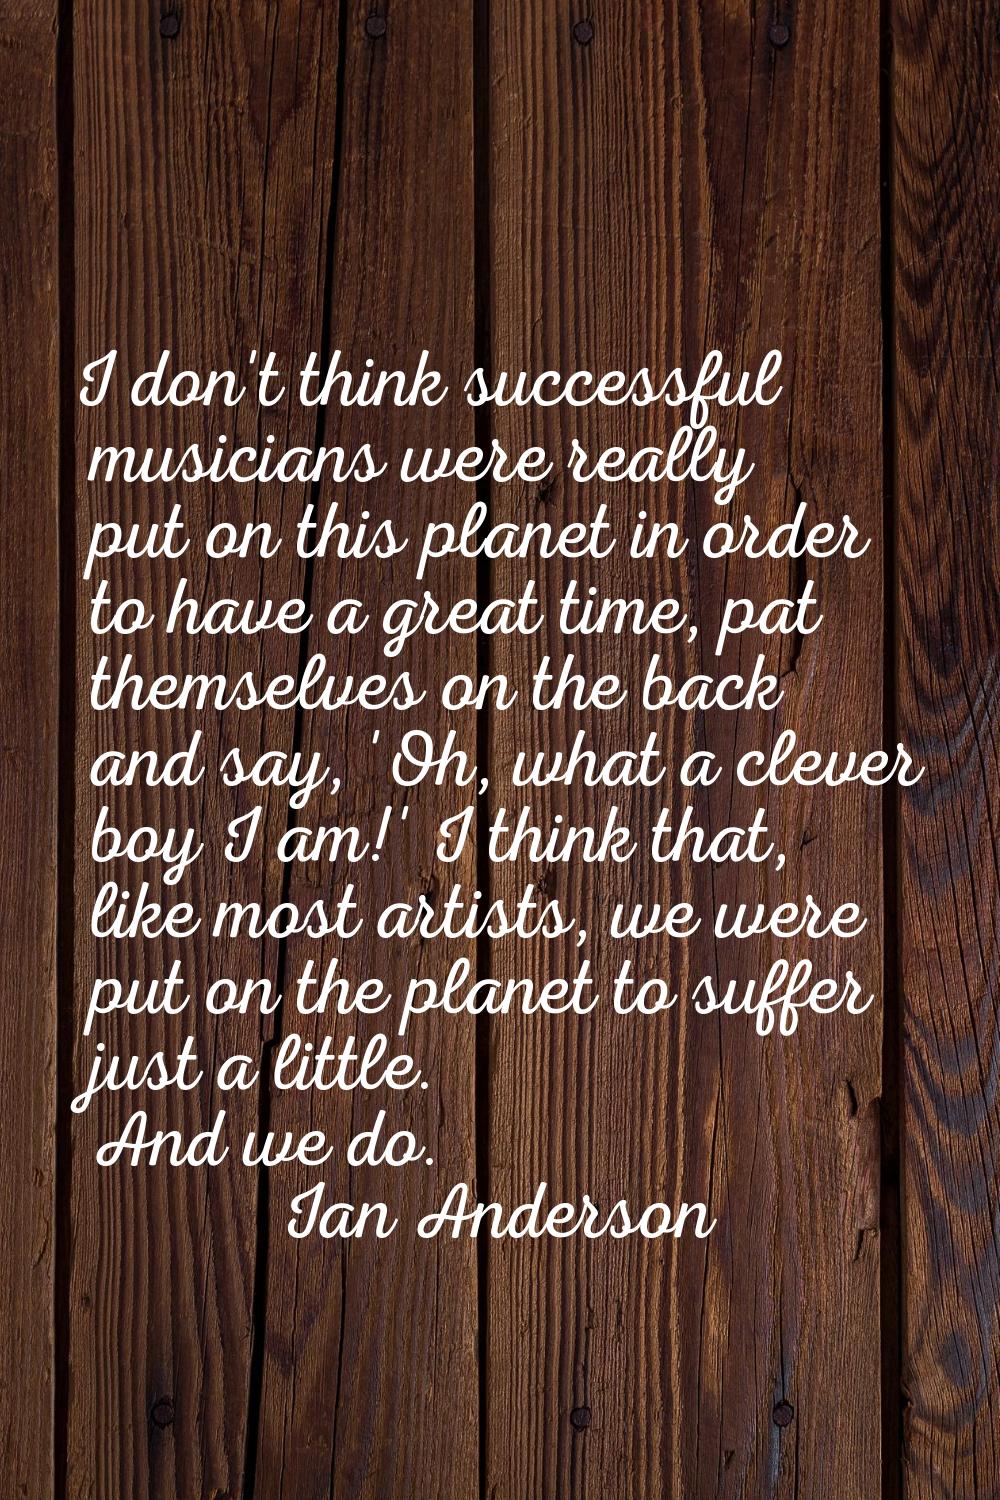 I don't think successful musicians were really put on this planet in order to have a great time, pa